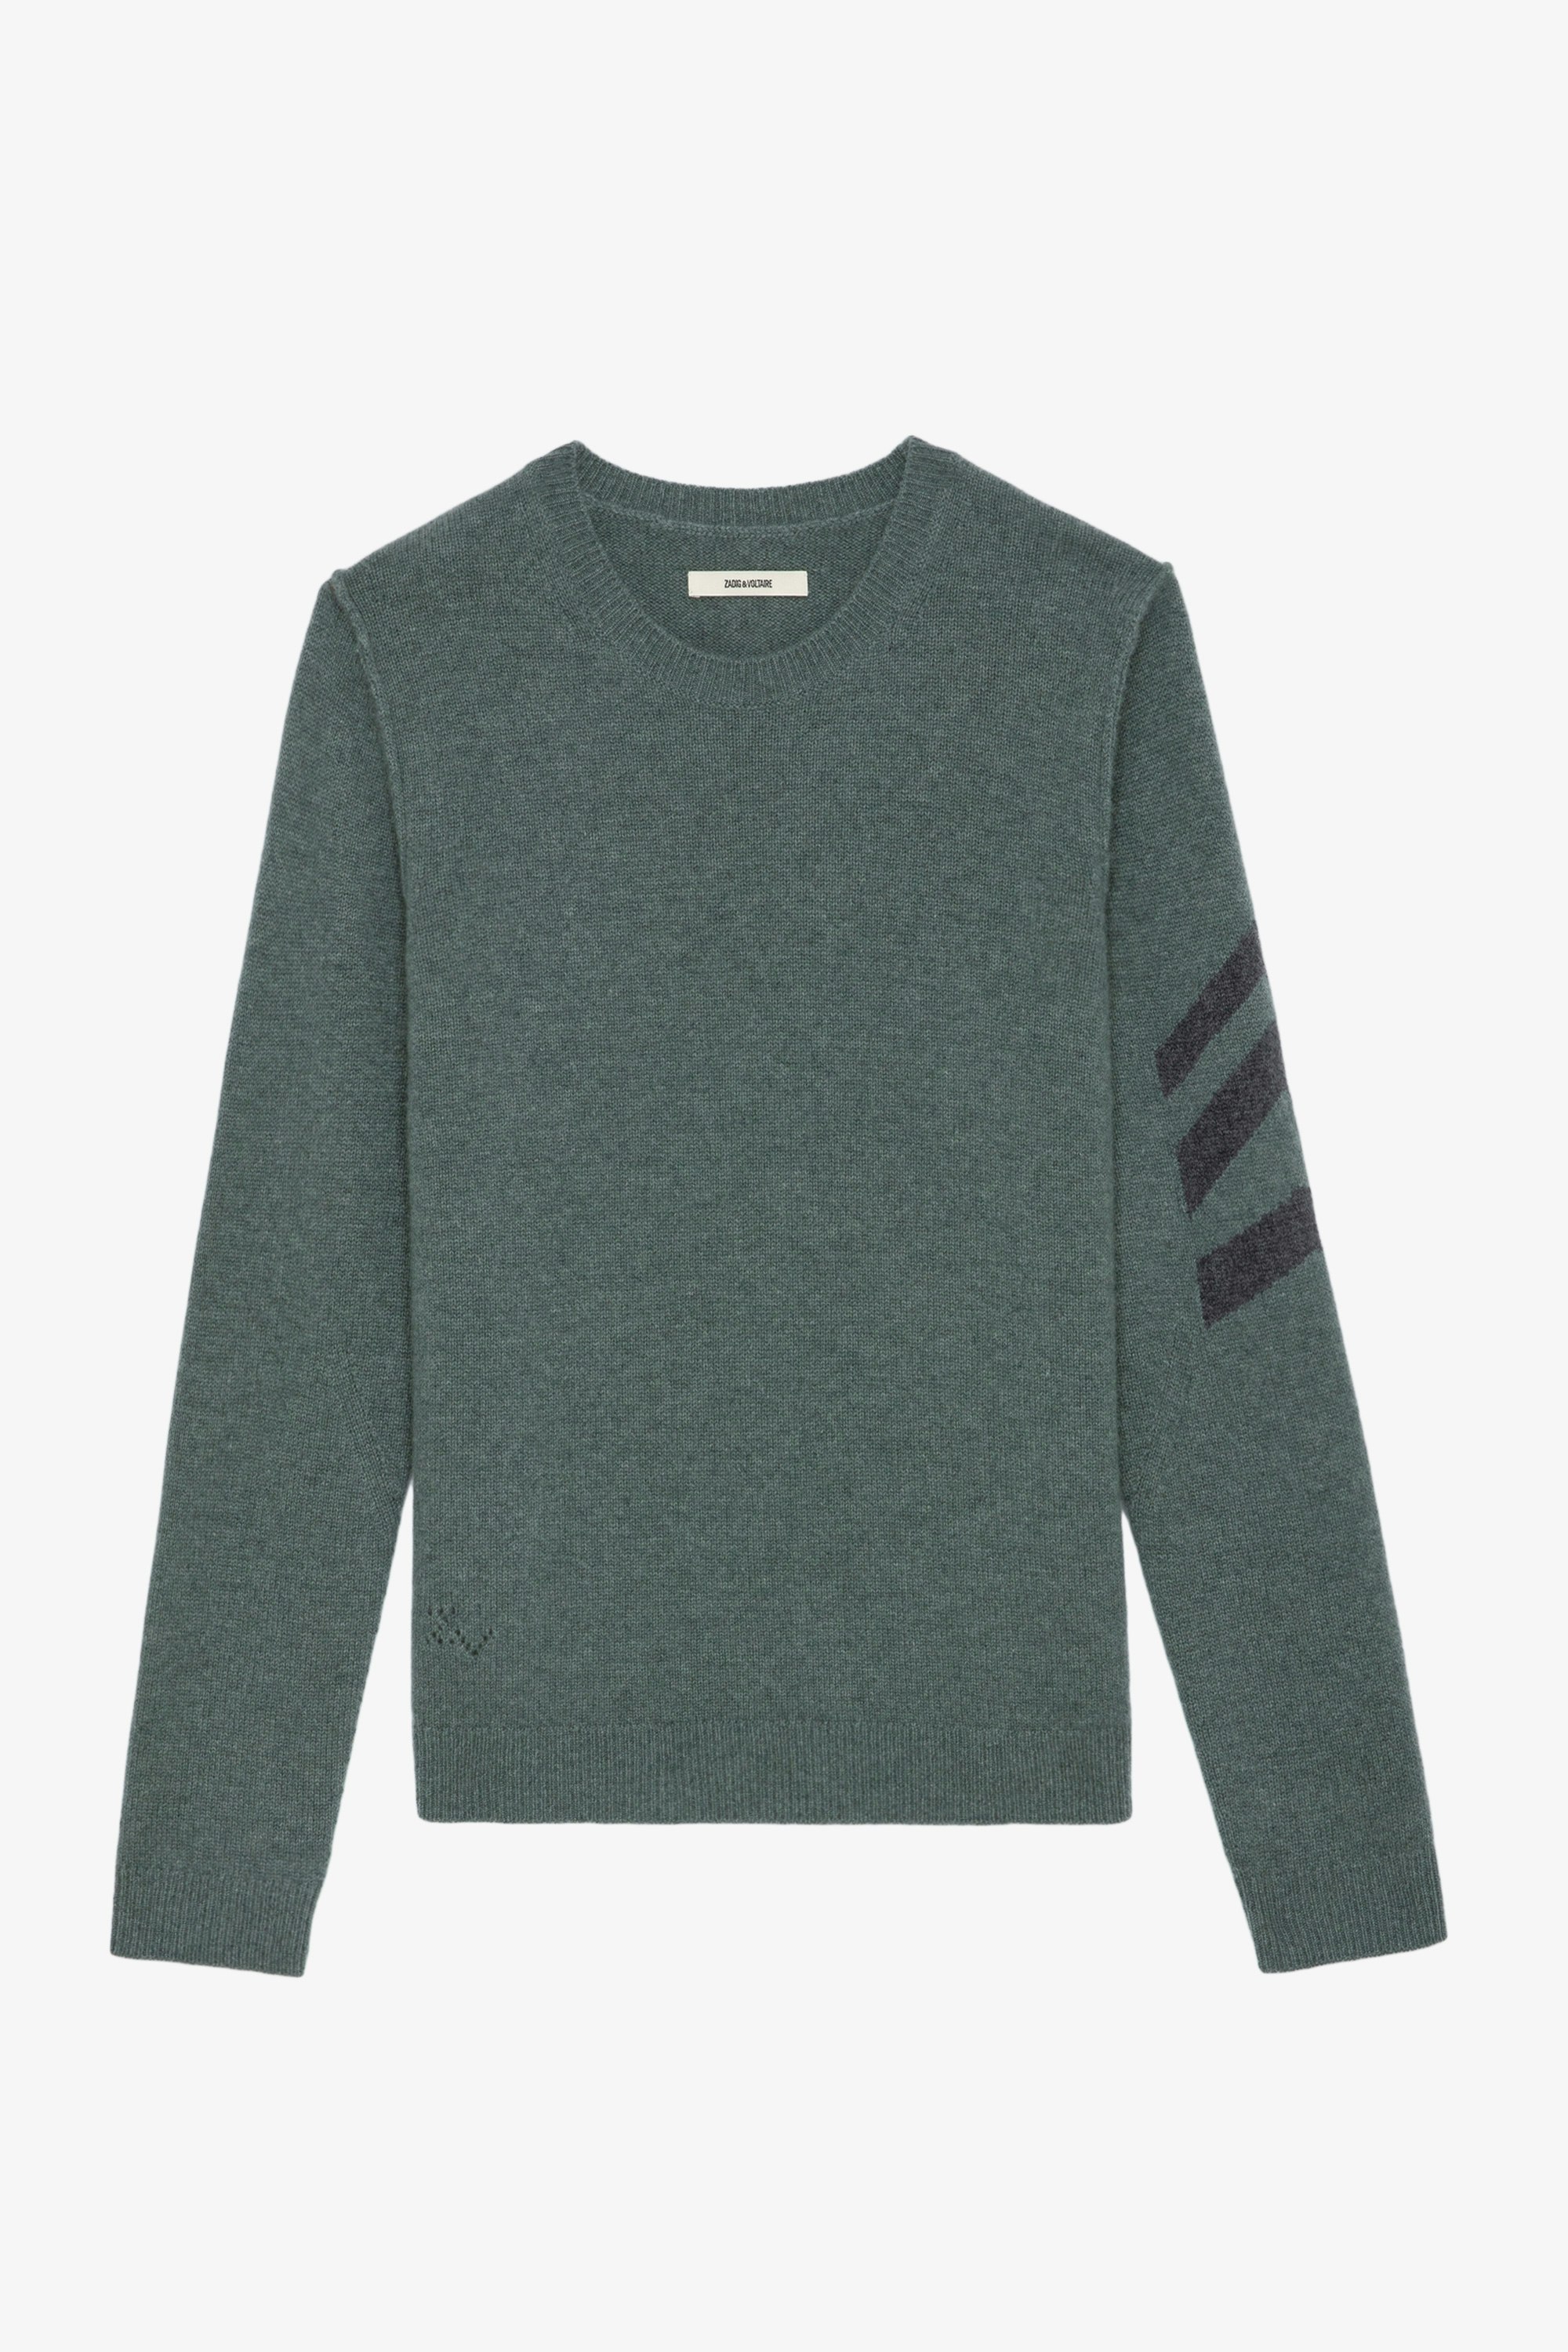 Kennedy Cashmere Jumper - Grey cashmere round-neck jumper with arrows on the left sleeve.